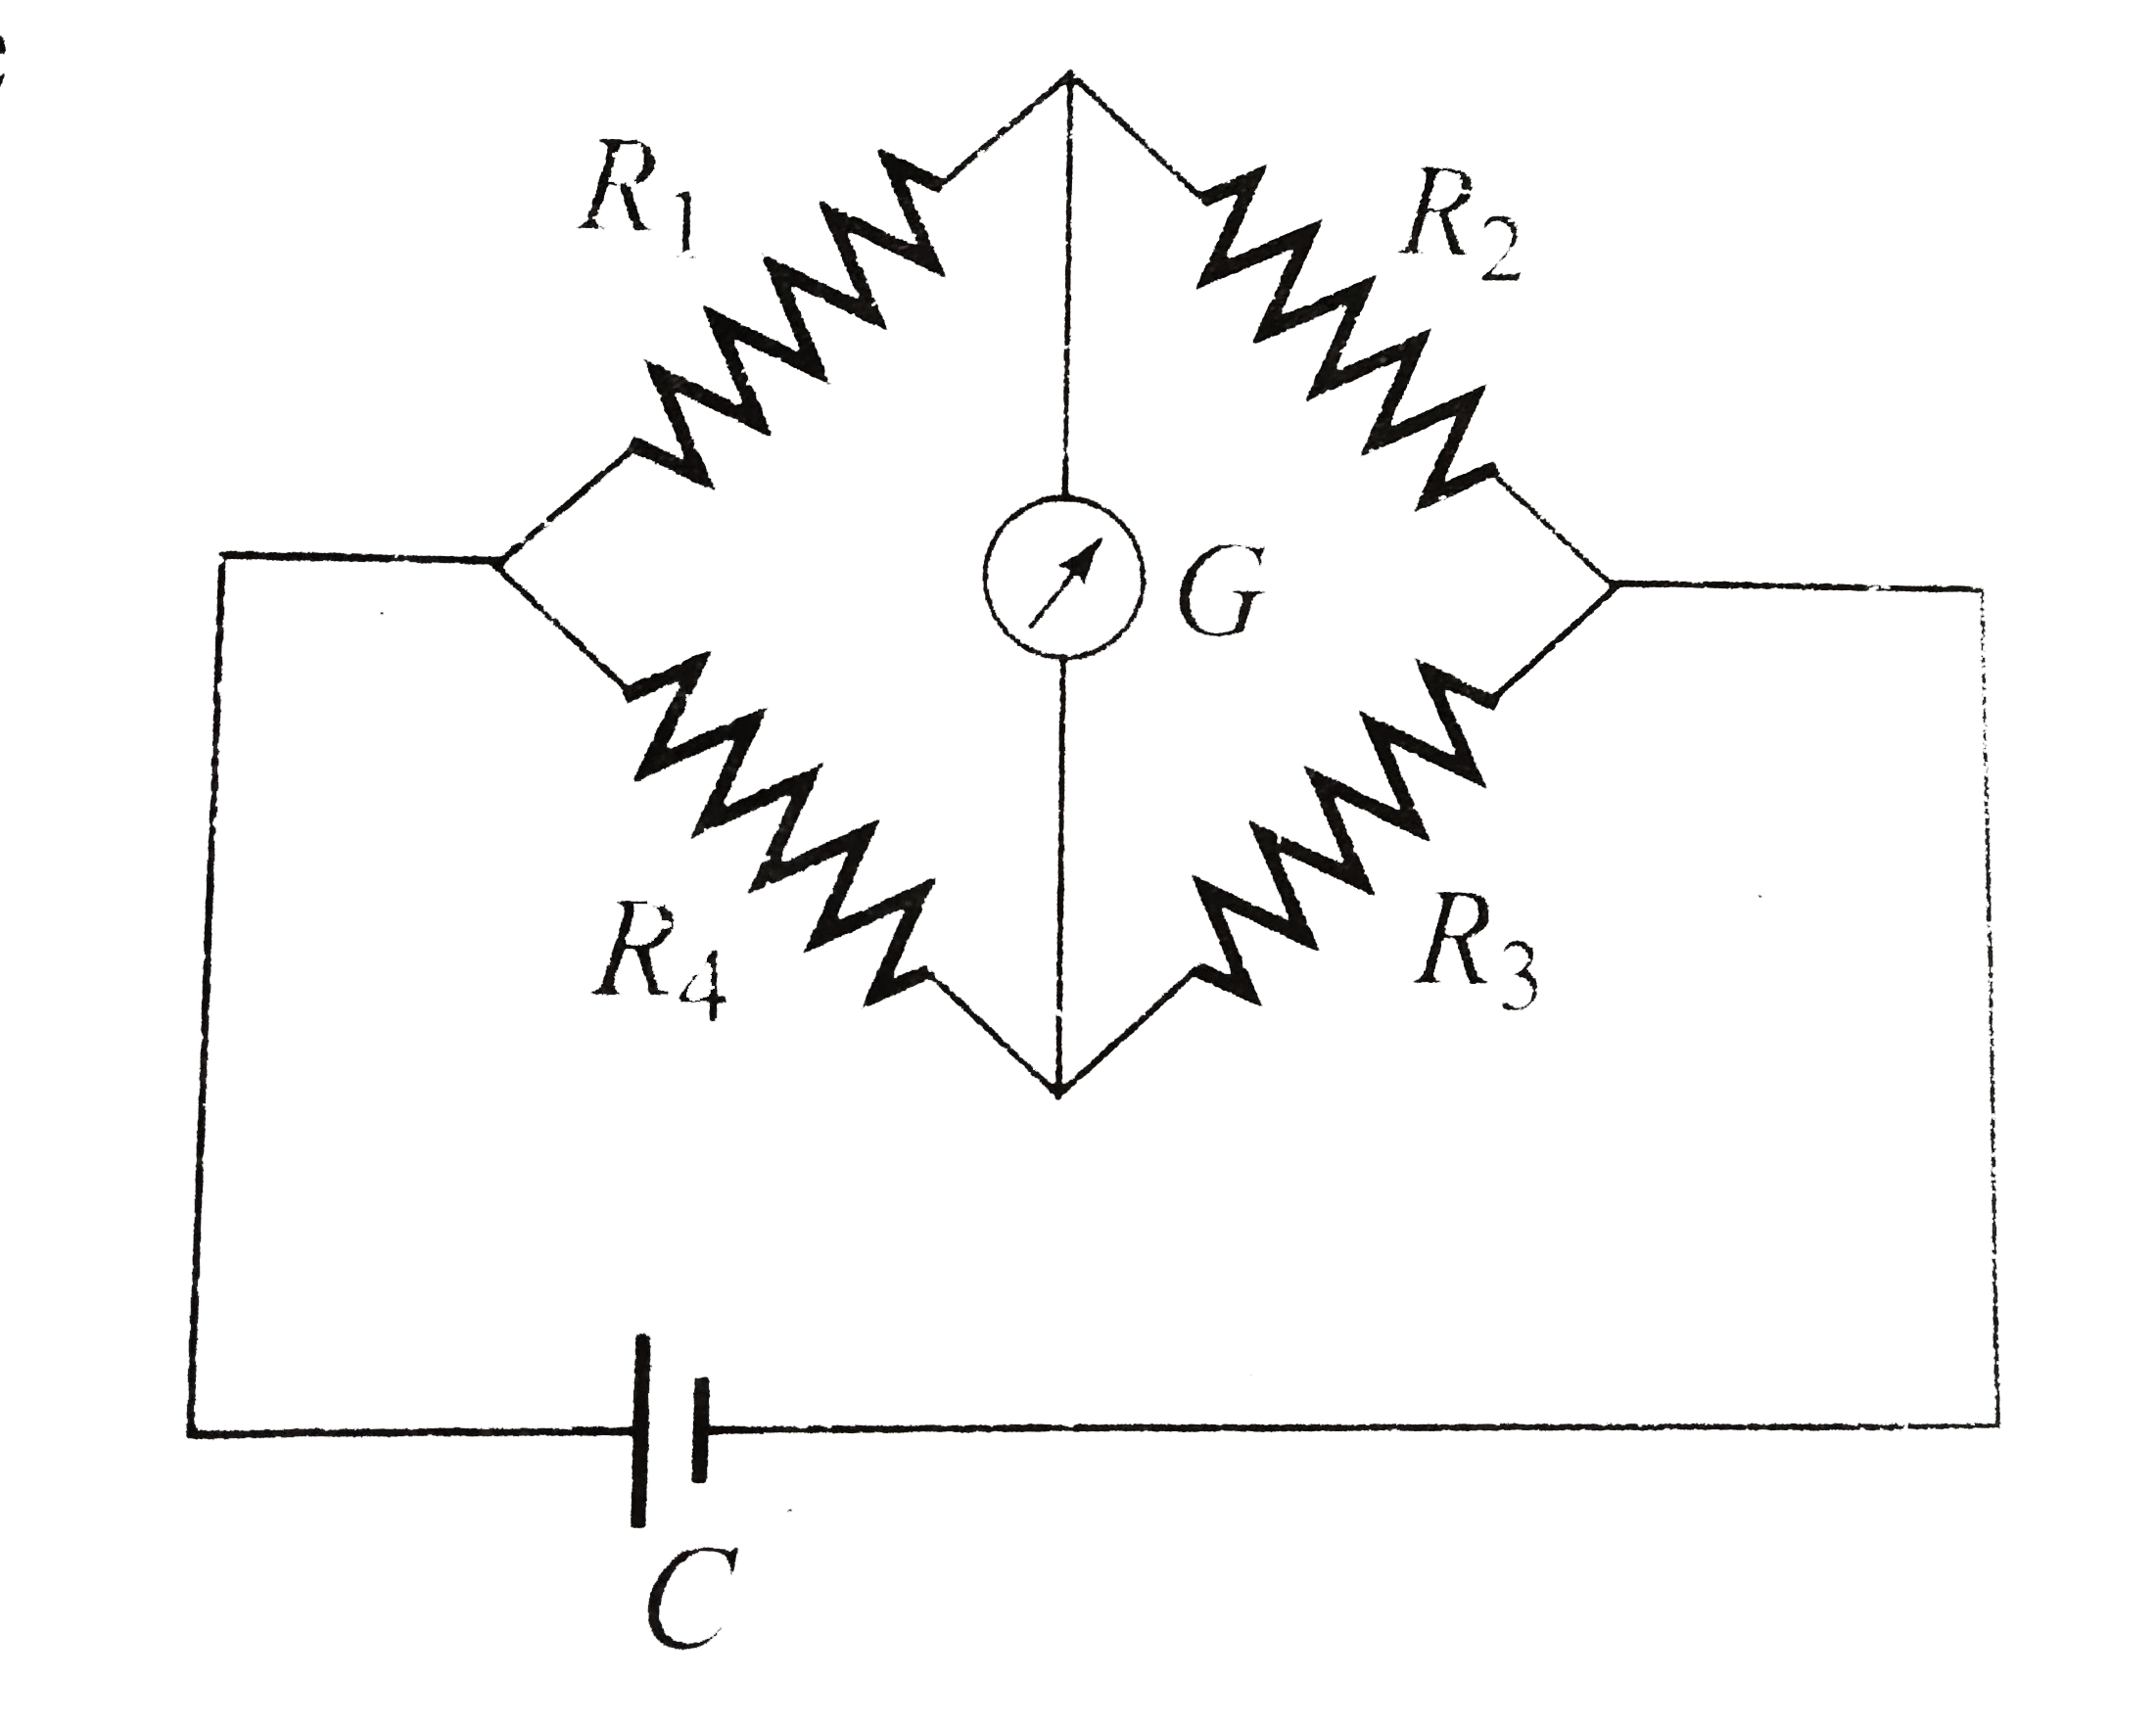 The Wheatstone's bridge shown in the Fig. A2.5 is balanced. If the positions of the cell C and the galvanometer F are now interchanged, G will show zero deflection